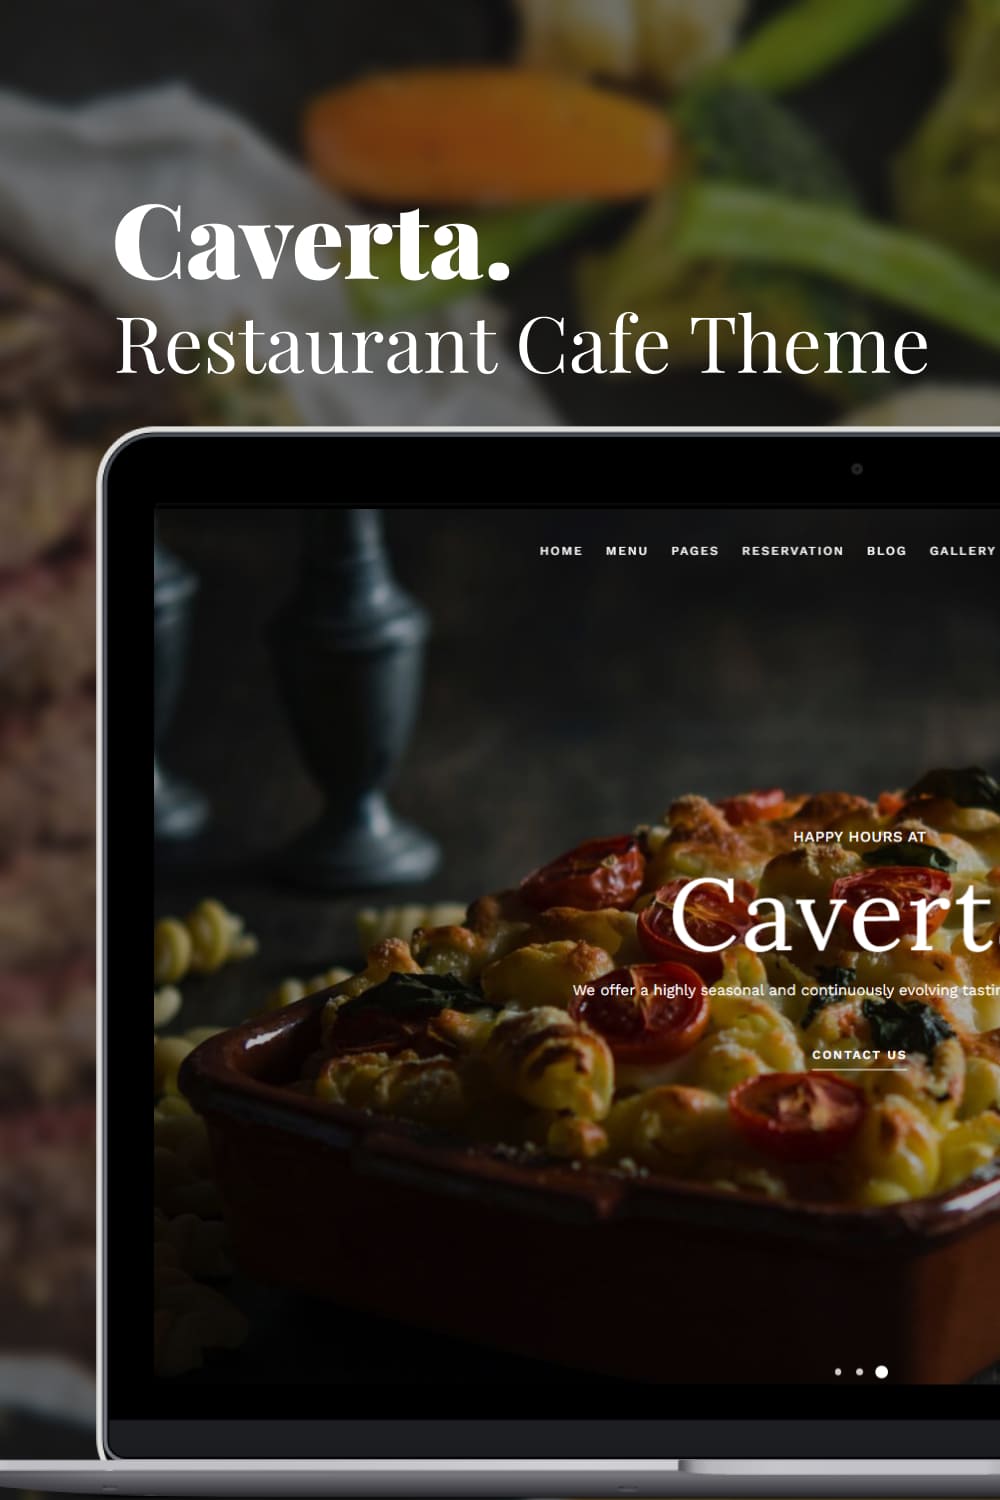 An image of a wonderful WordPress theme page on a restaurant theme.